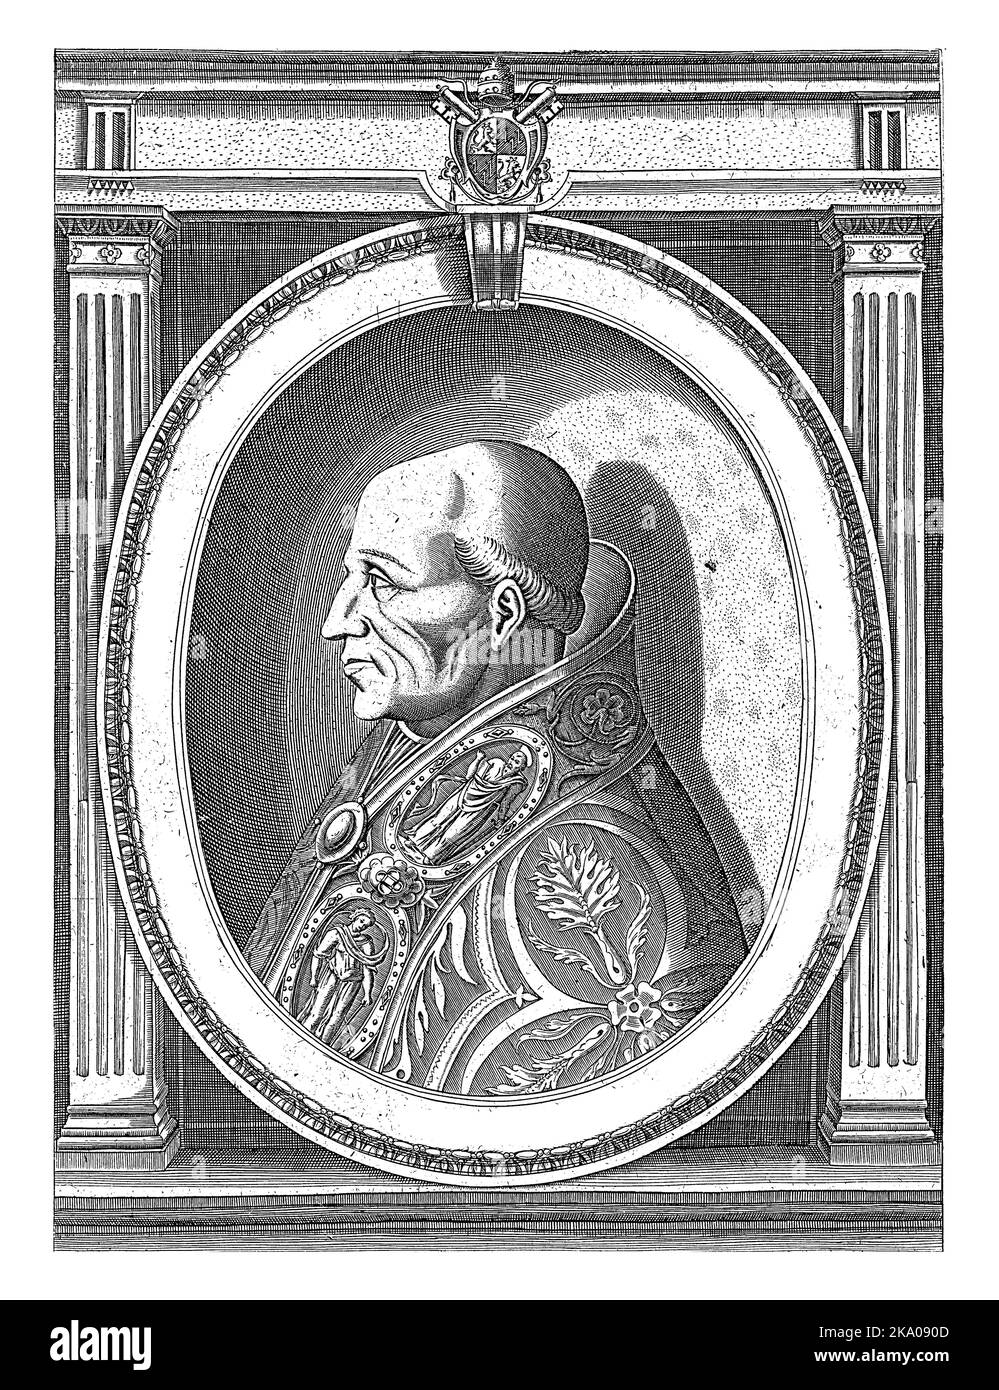 Portrait of Pope Adrian VI wearing the papal robes. Bust and profile to the left in an oval frame with edge lettering. Stock Photo